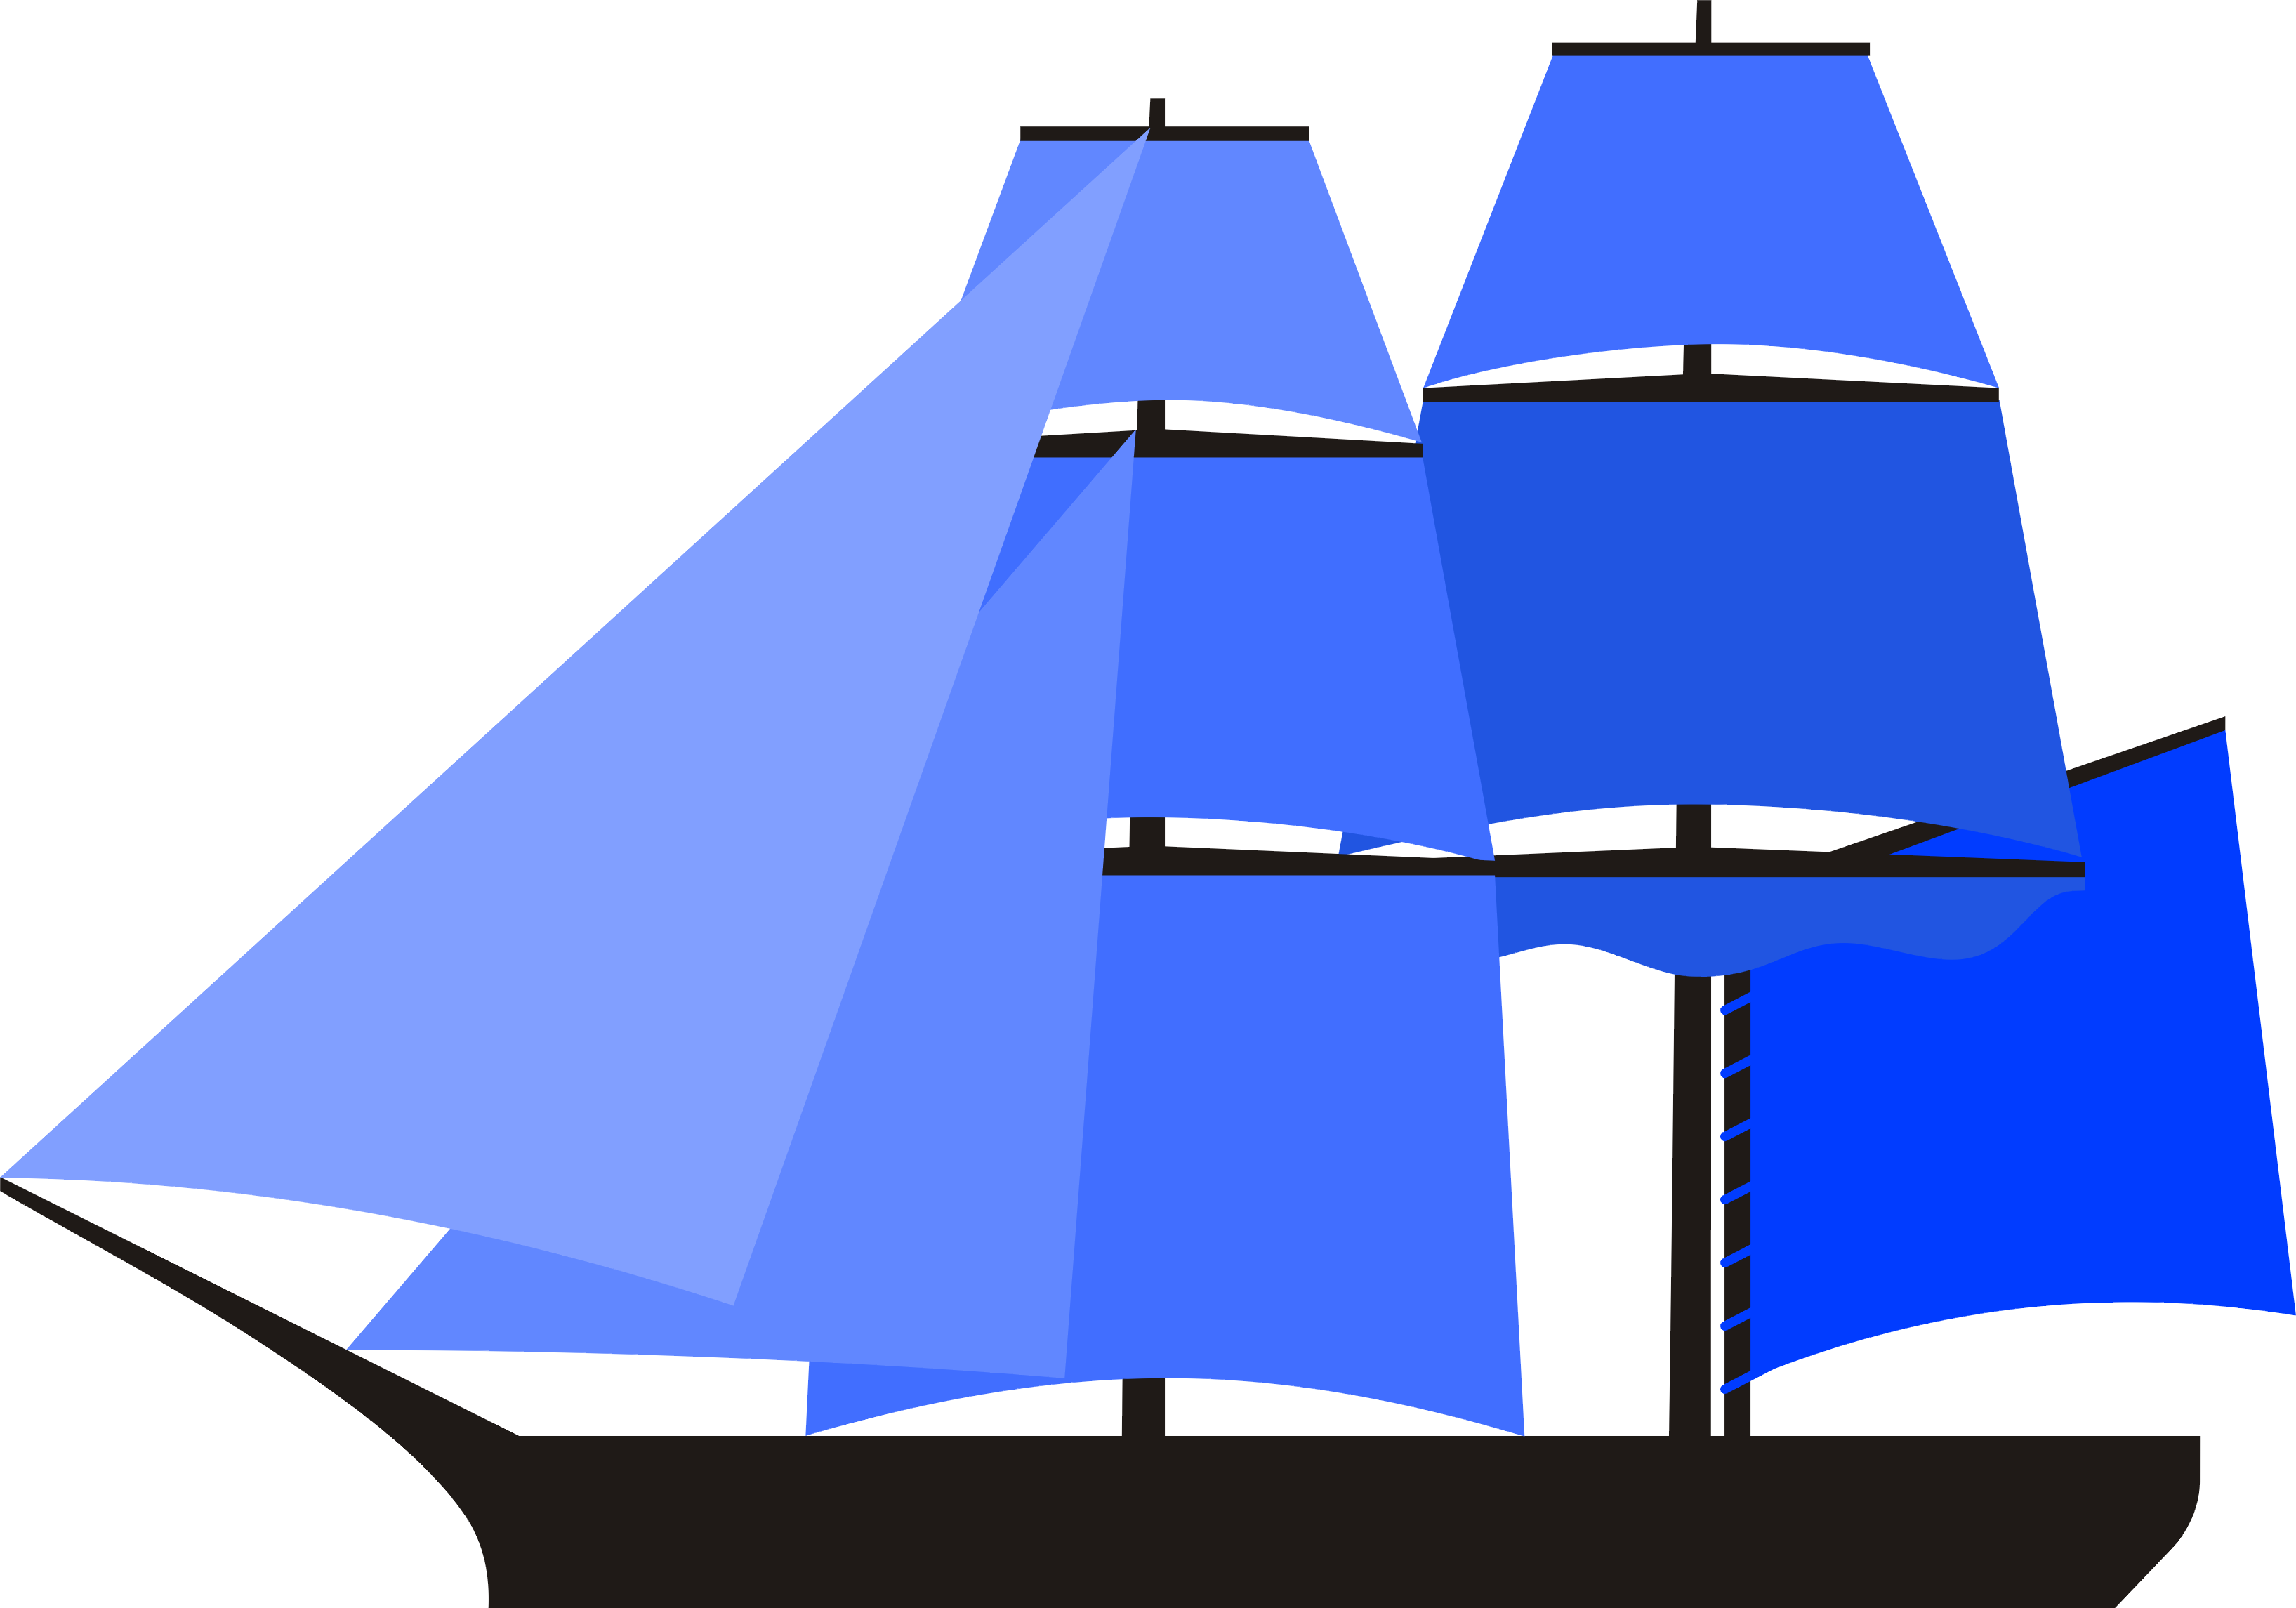 Snow wikipedia . Boating clipart two ship